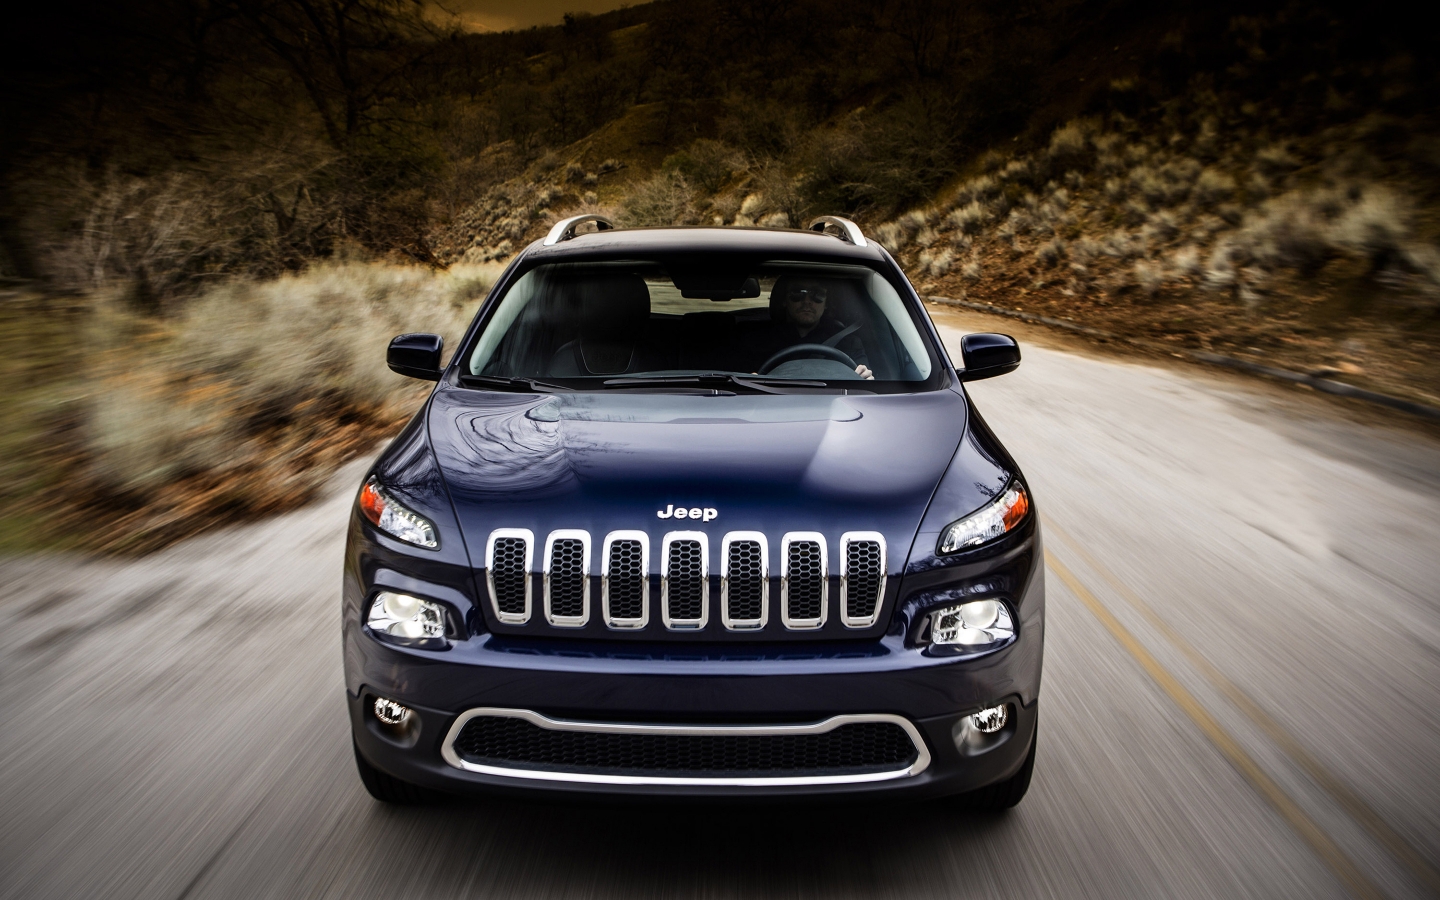 2014 Jeep Cherokee for 1440 x 900 widescreen resolution